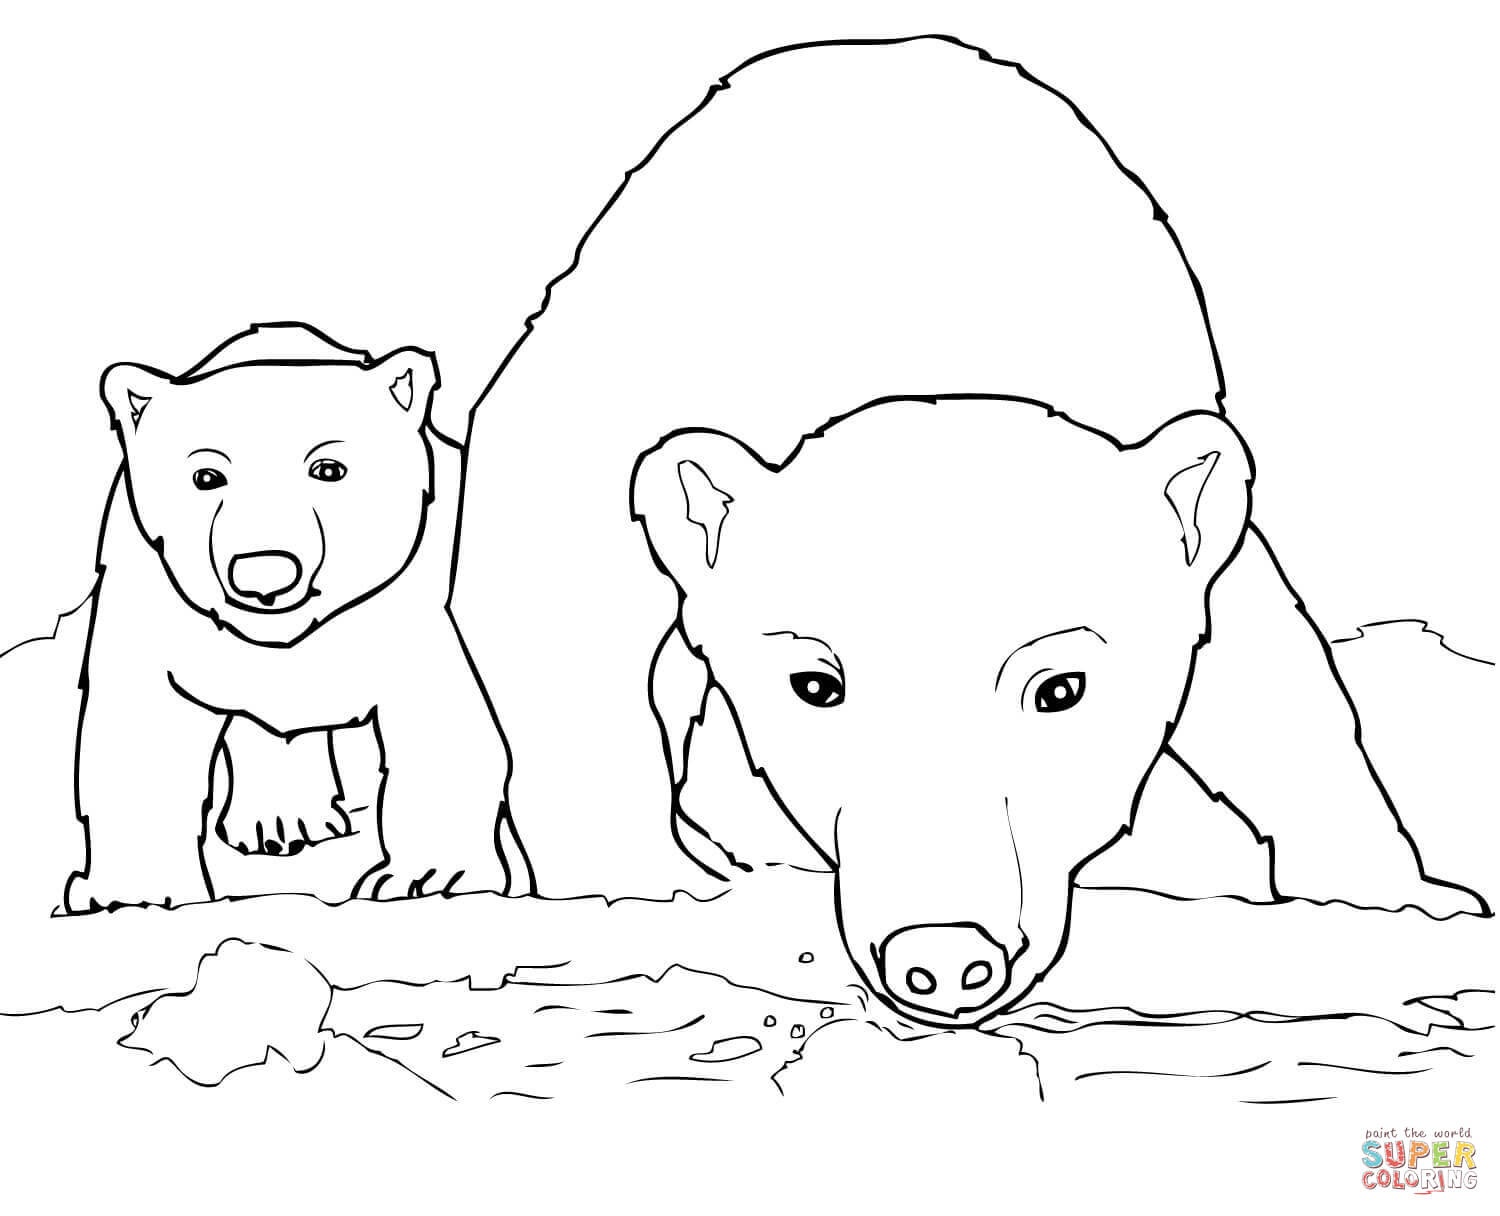 Curious Polar Bear Mother And Cub Coloring Page | Free Printable - Polar Bear Printable Pictures Free